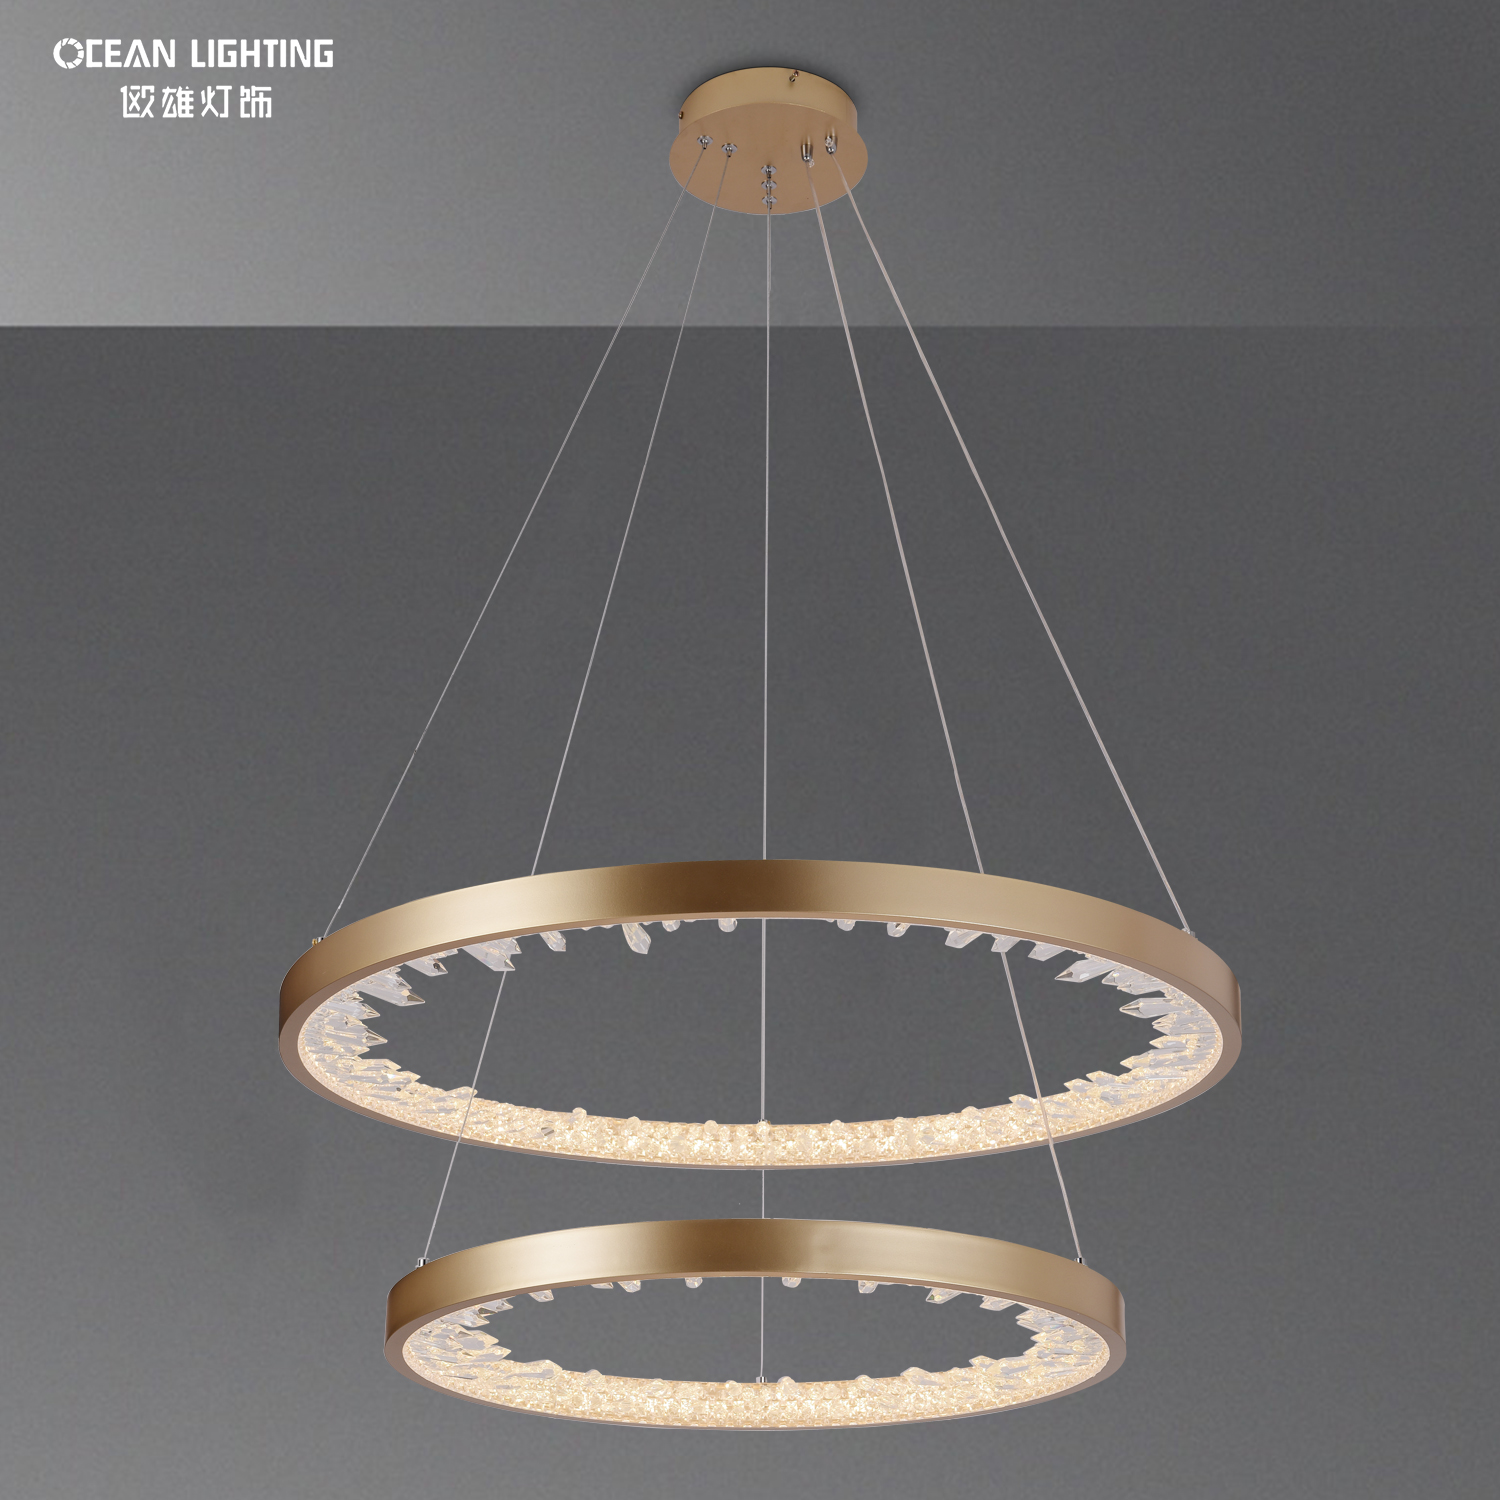 OCEAN LAMP Black And Gold Bedroom Contemporary High Ceiling Round Chandelier